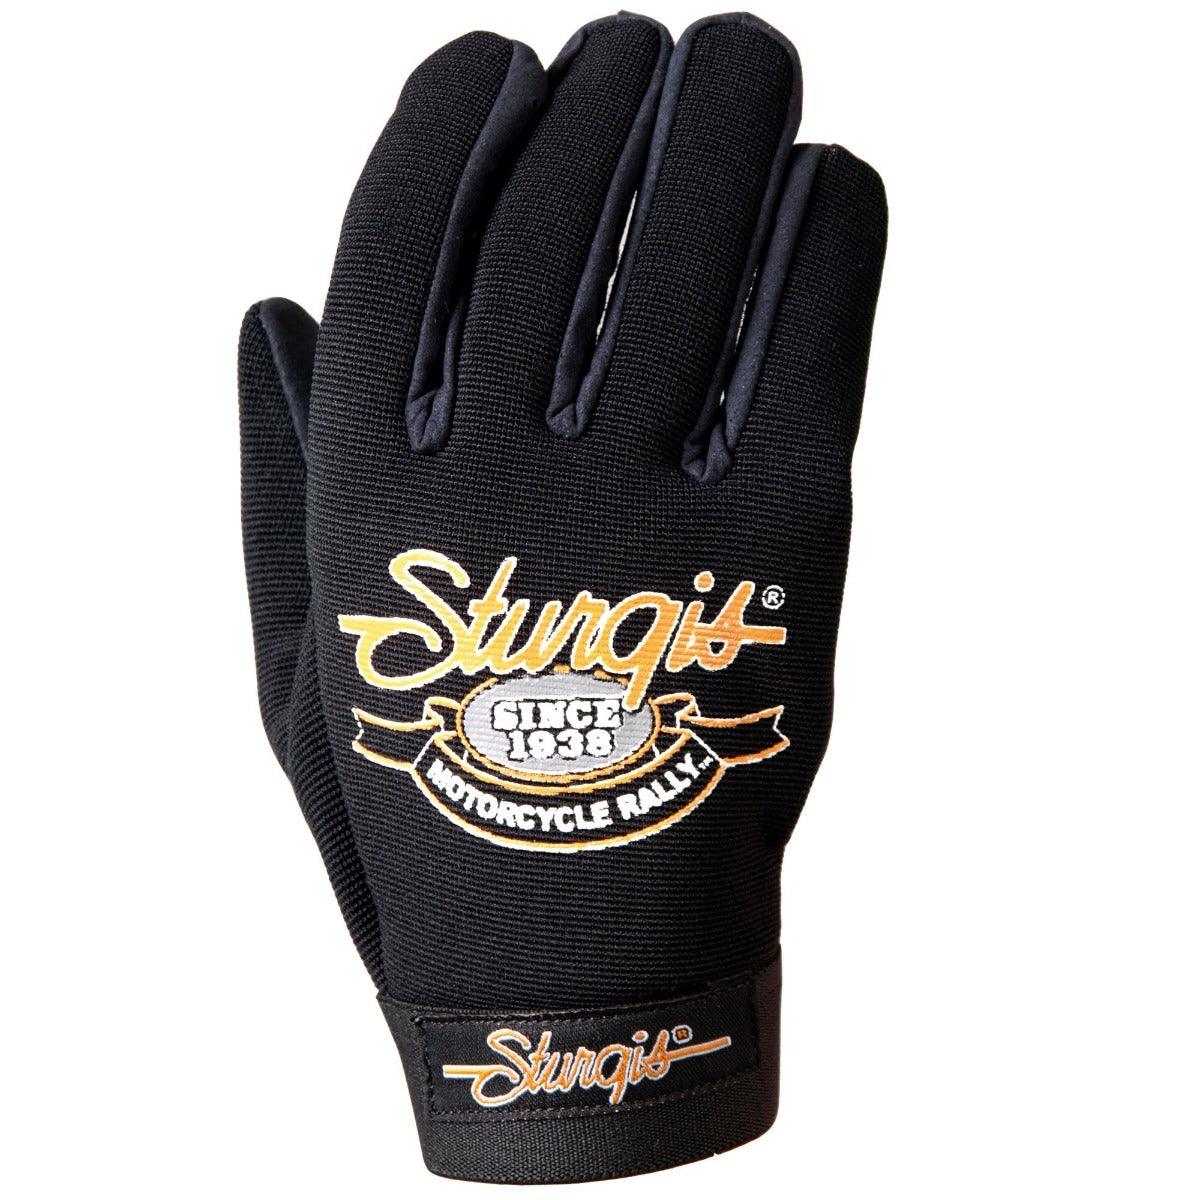 Hot Leathers Official Sturgis Motorcycle Rally Mechanics Gloves, Black - American Legend Rider